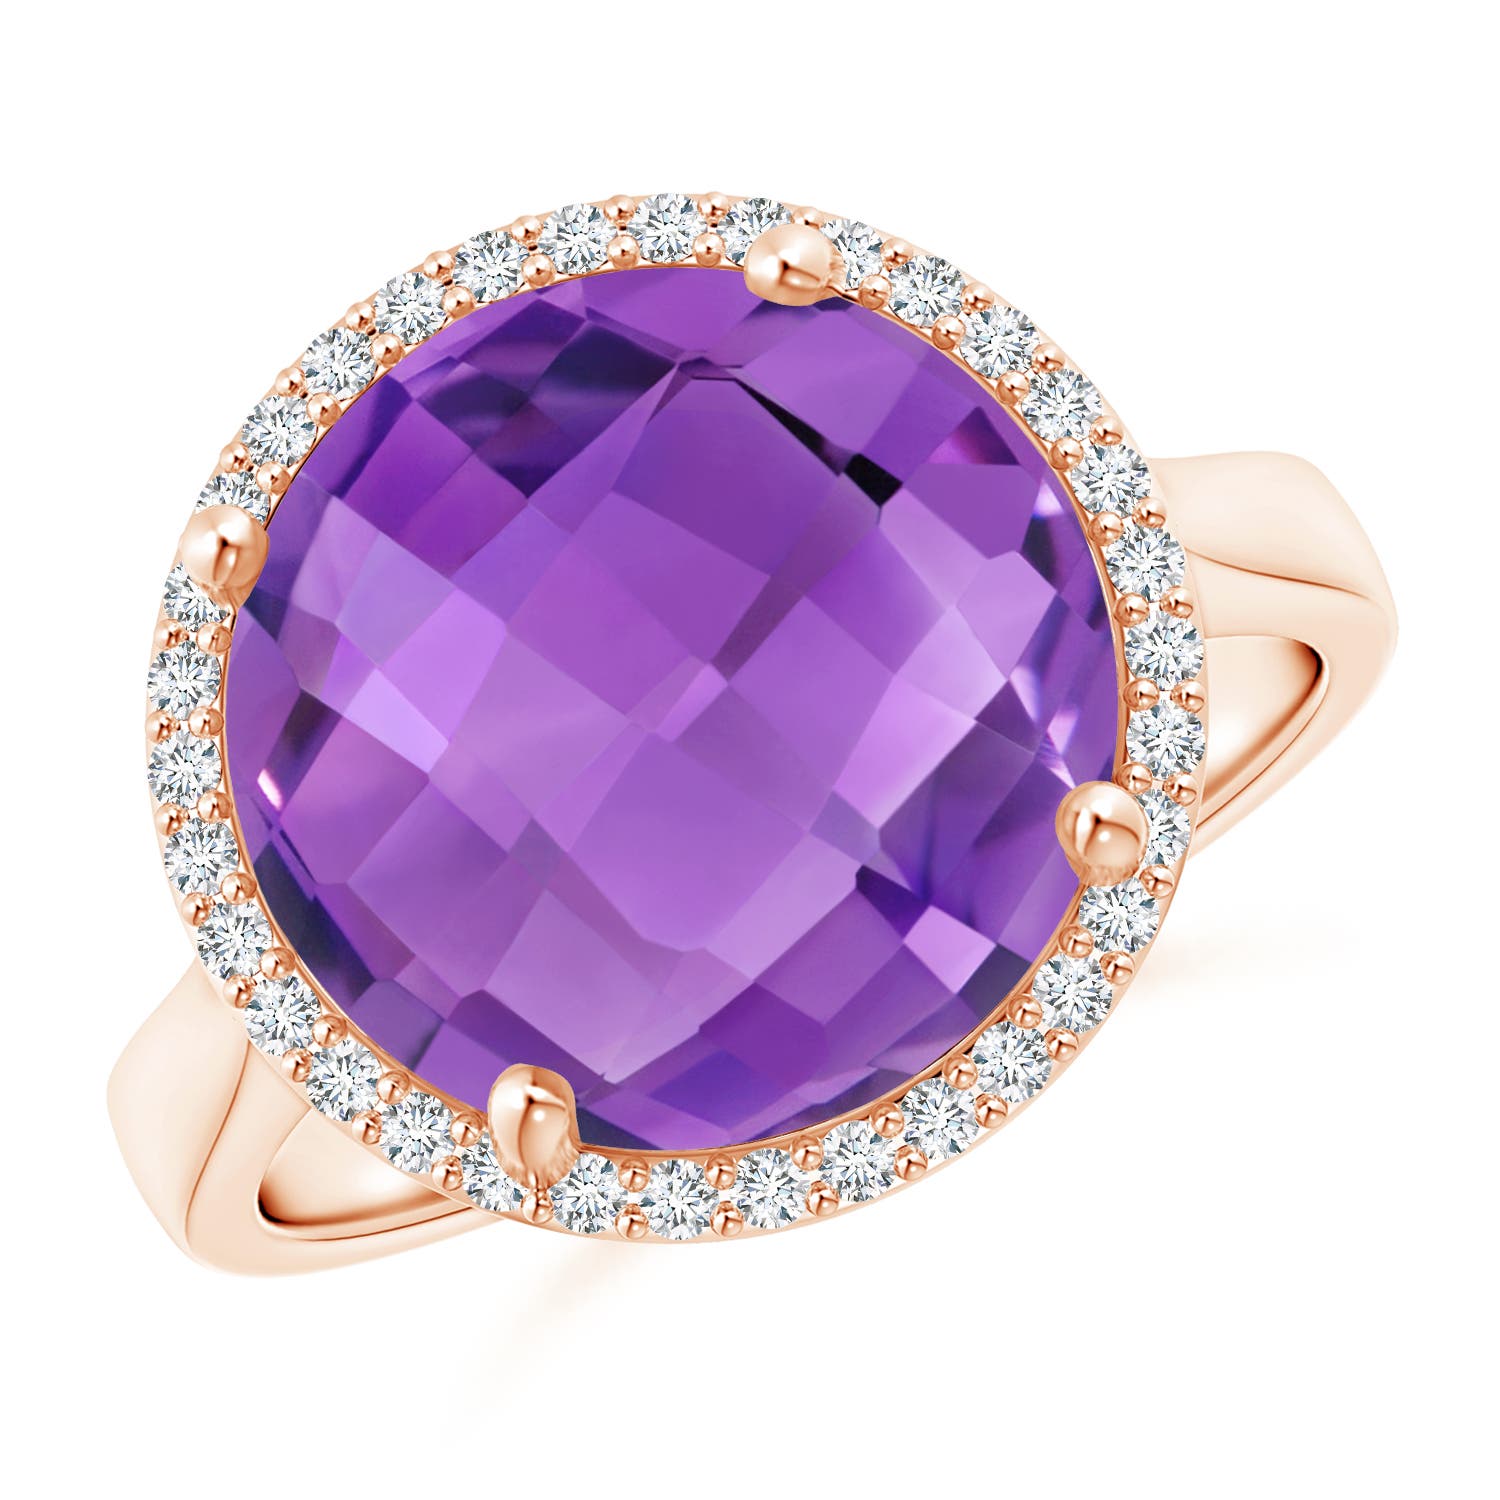 AA - Amethyst / 5.7 CT / 14 KT Rose Gold